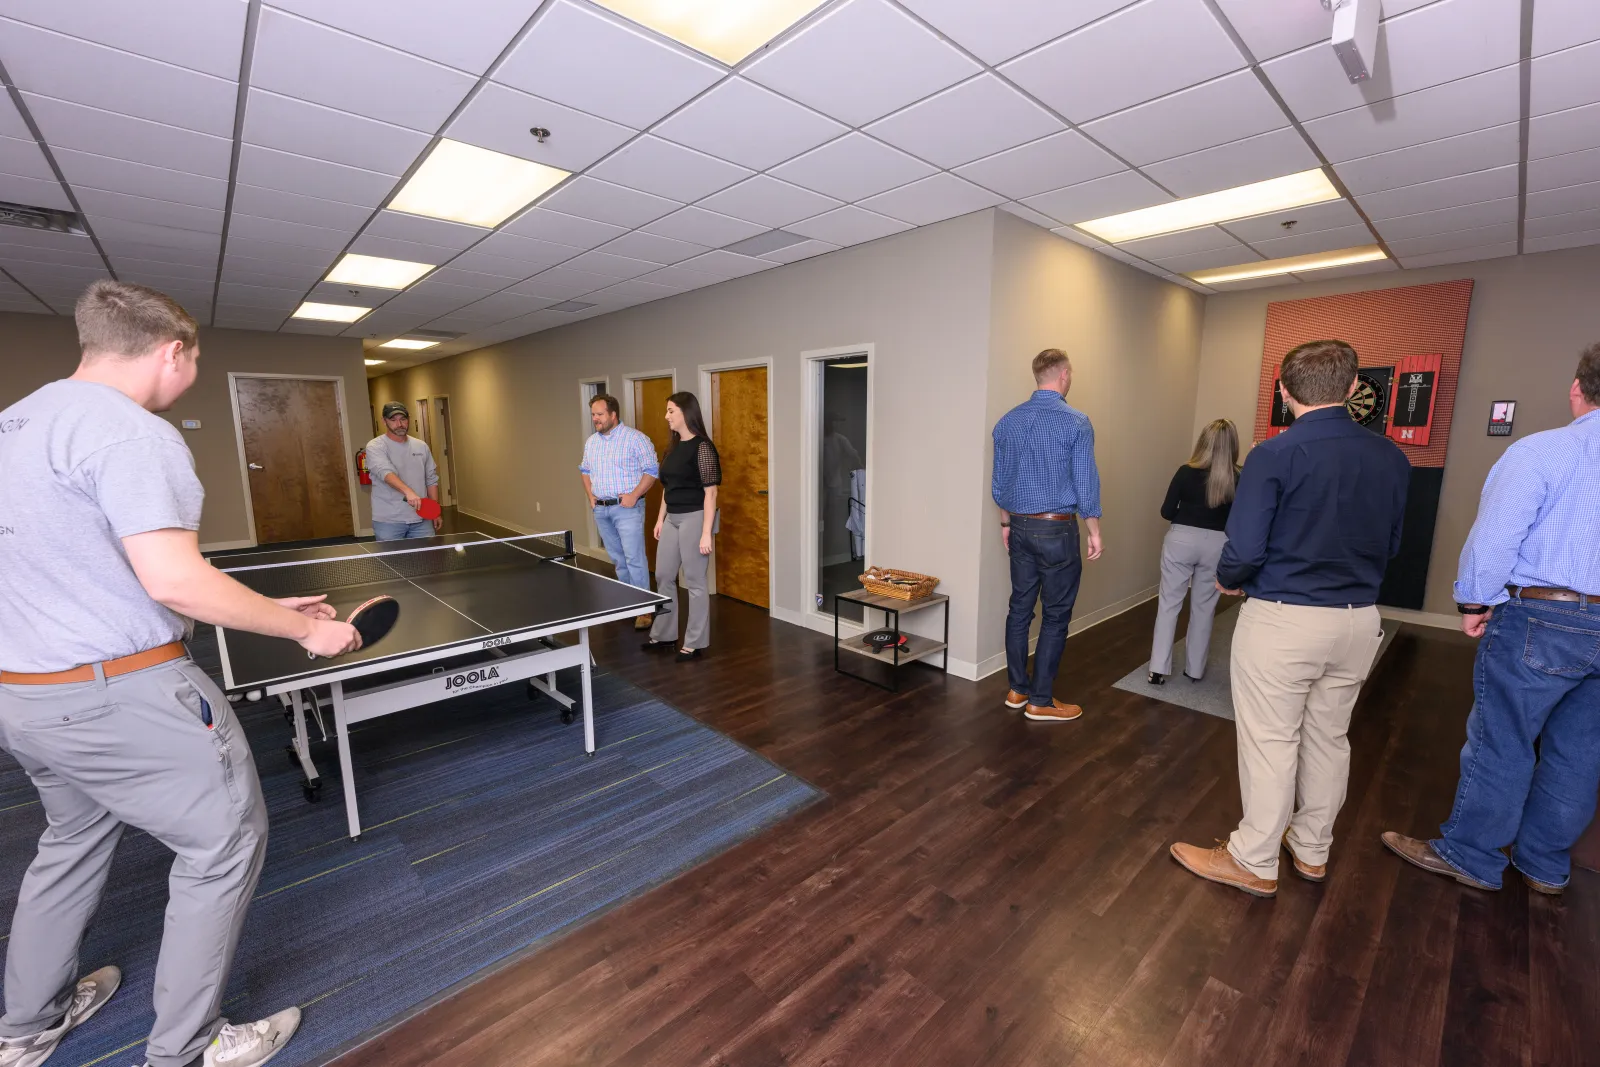 a group of people playing ping pong in a room